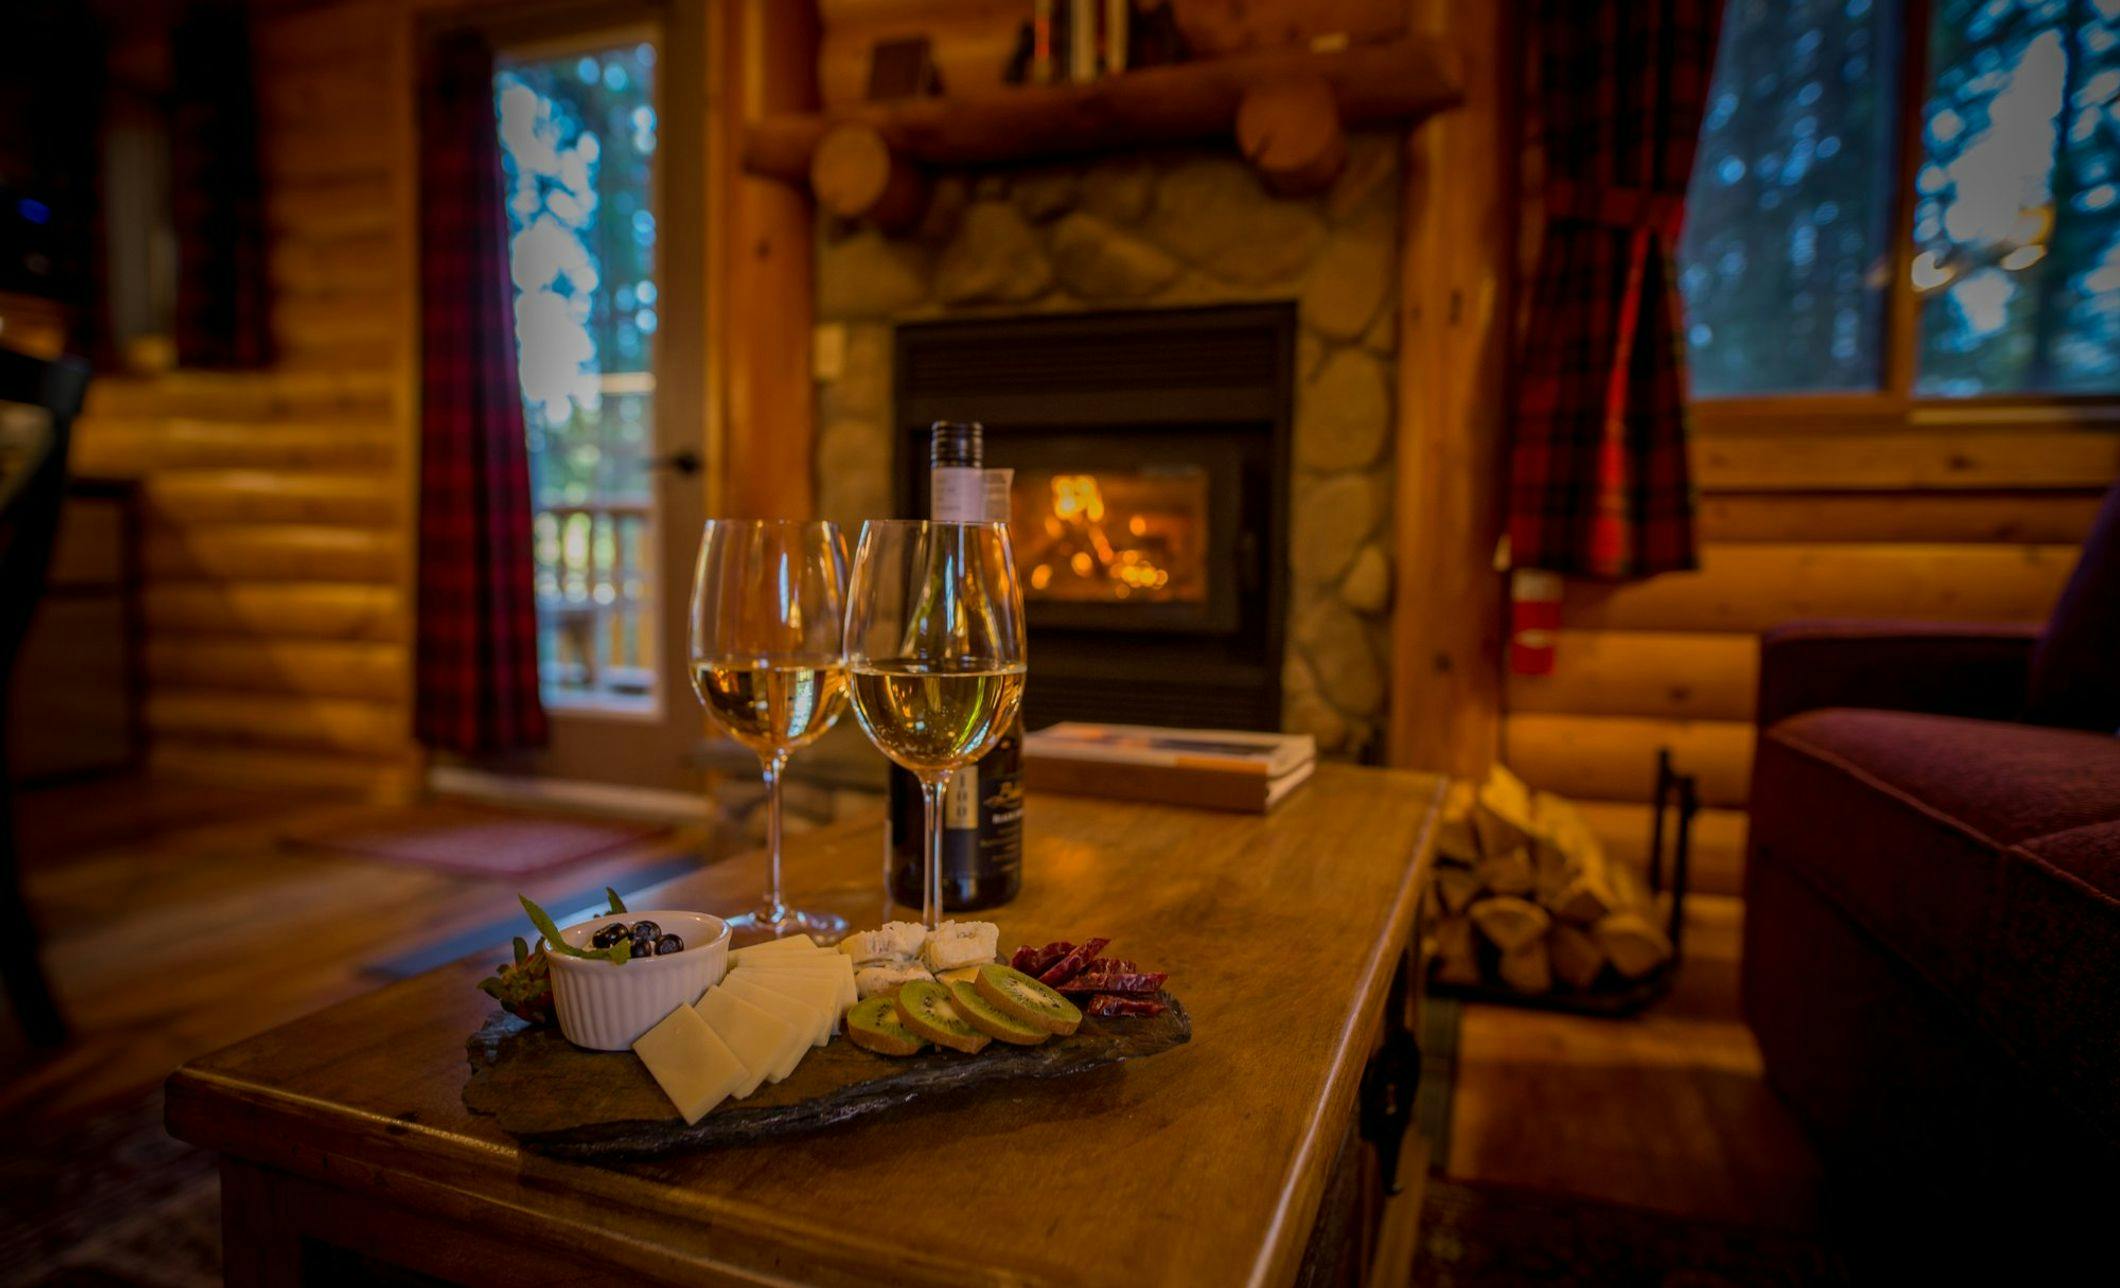 Wine glasses and charcuterie board by fireplace in a cozy cabin